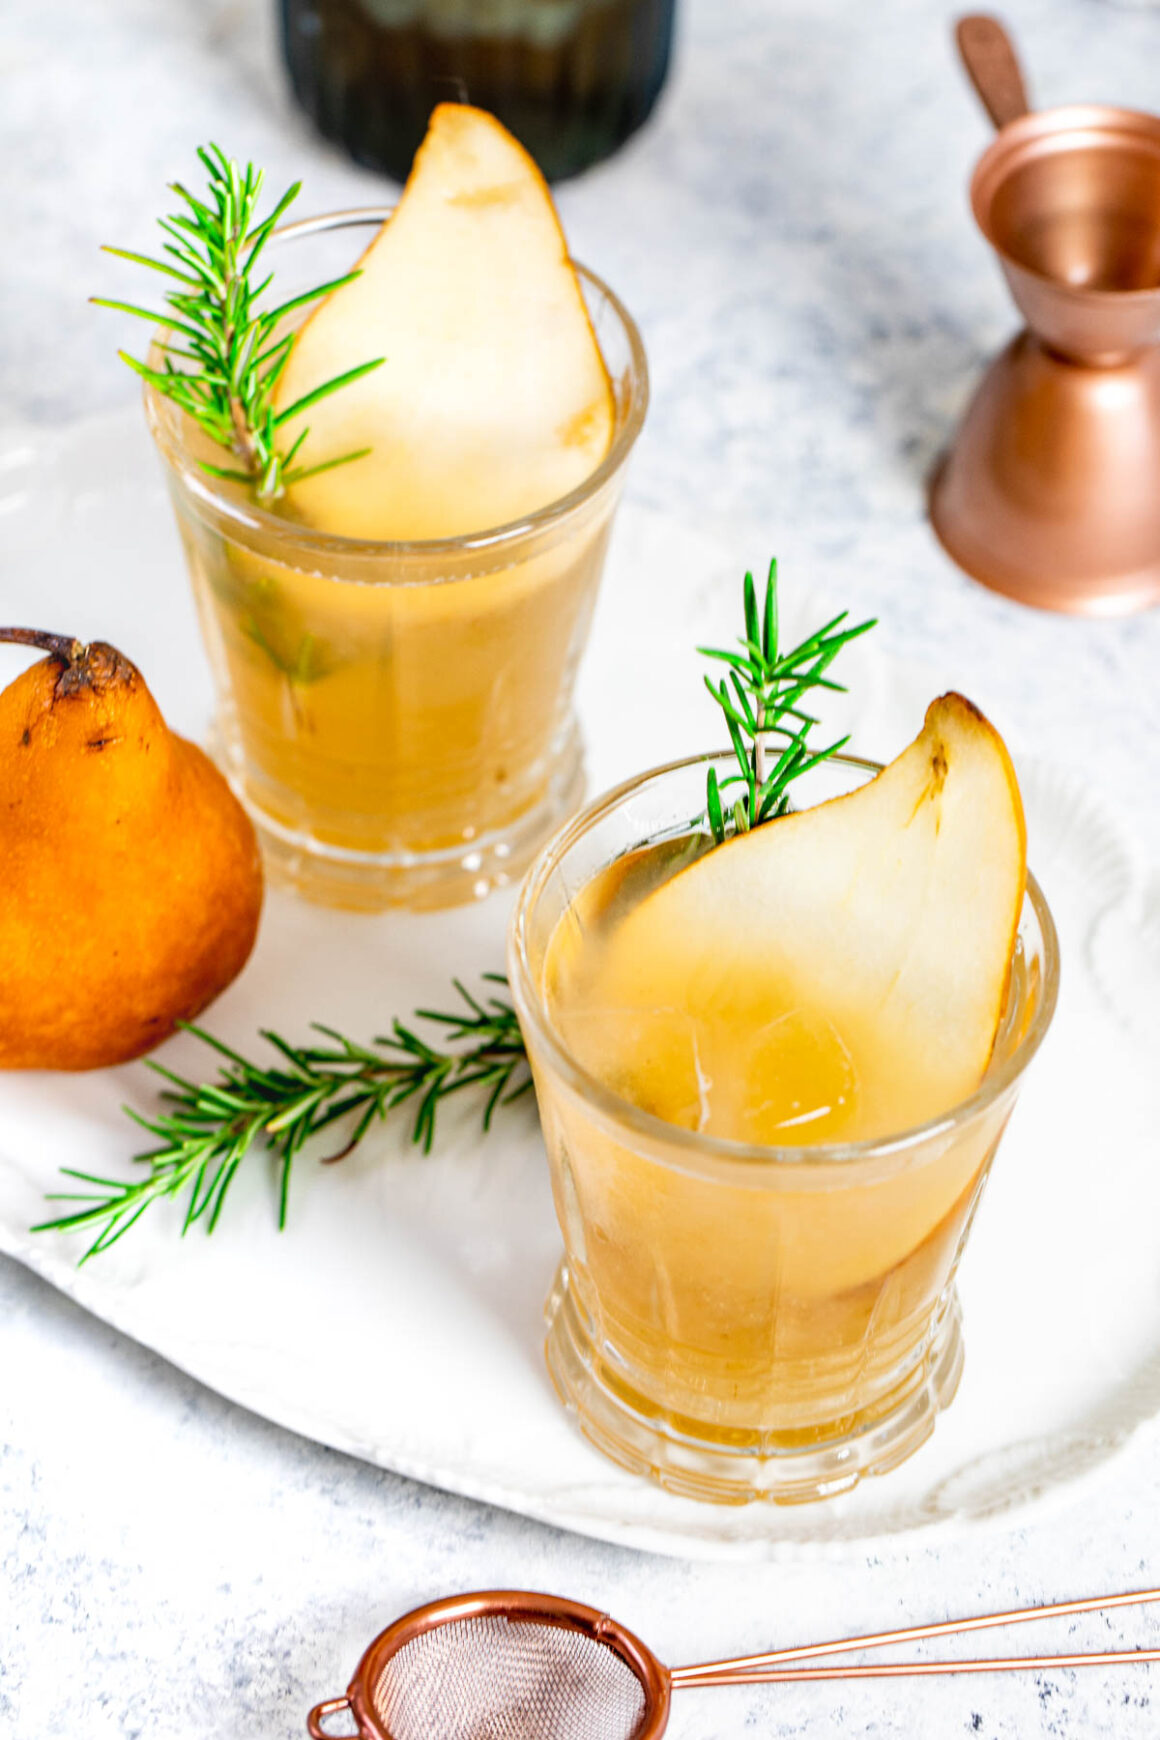 Prepare to embark on a journey of taste and refinement with our Pear Gin cocktail recipe.